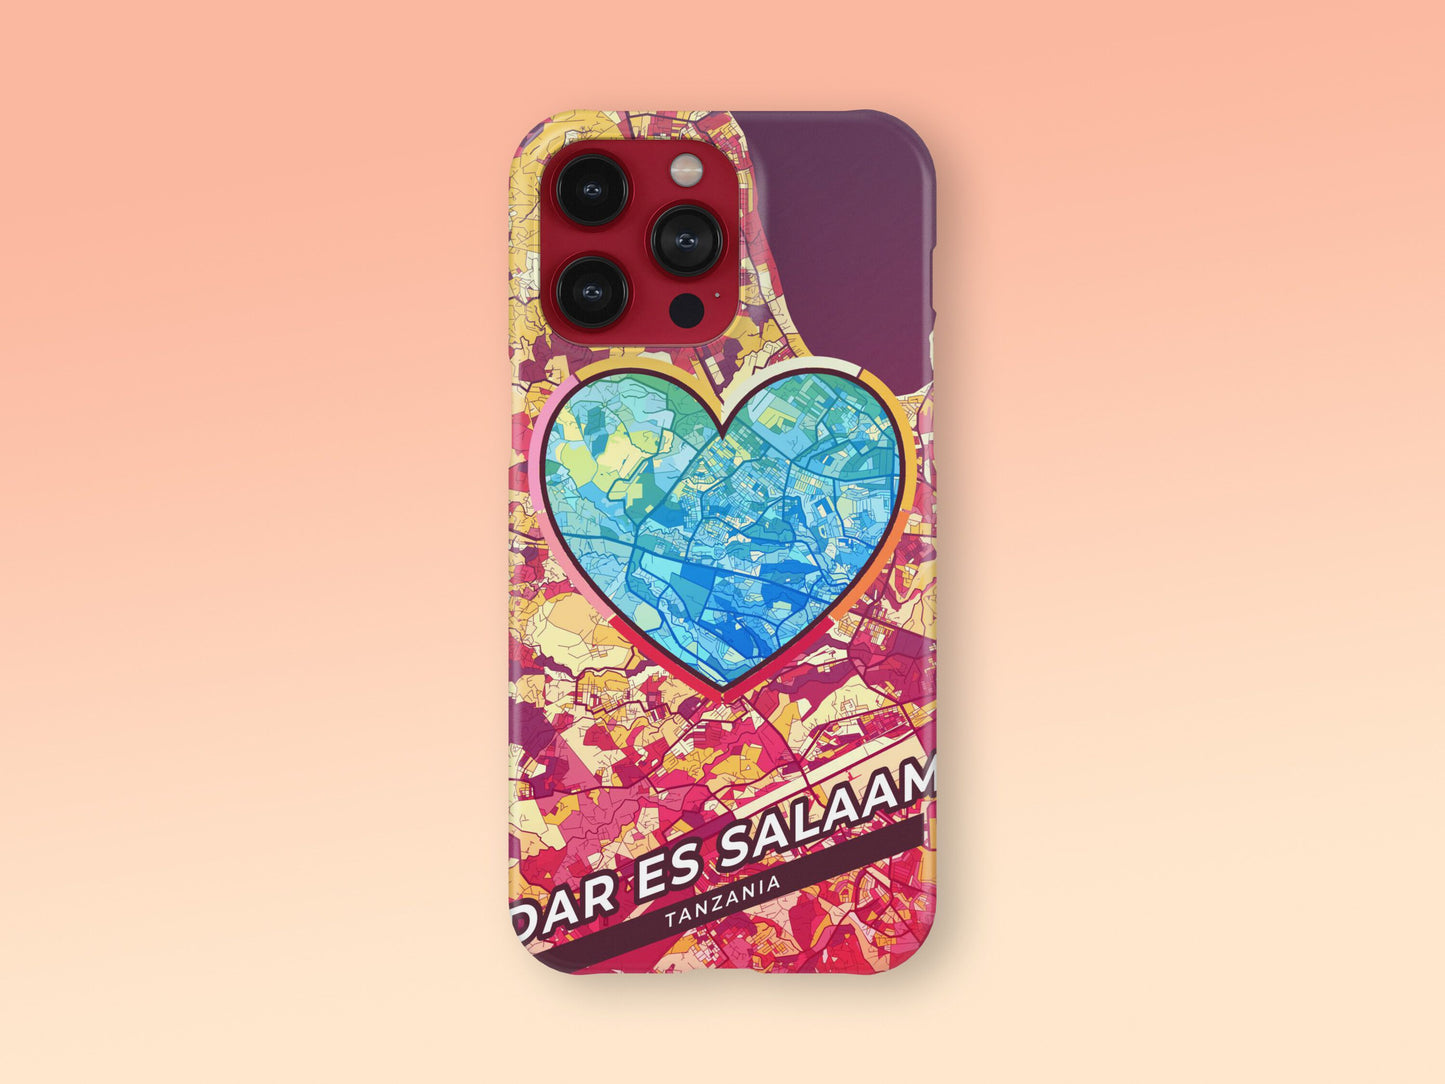 Dar Es Salaam Tanzania slim phone case with colorful icon. Birthday, wedding or housewarming gift. Couple match cases. 2